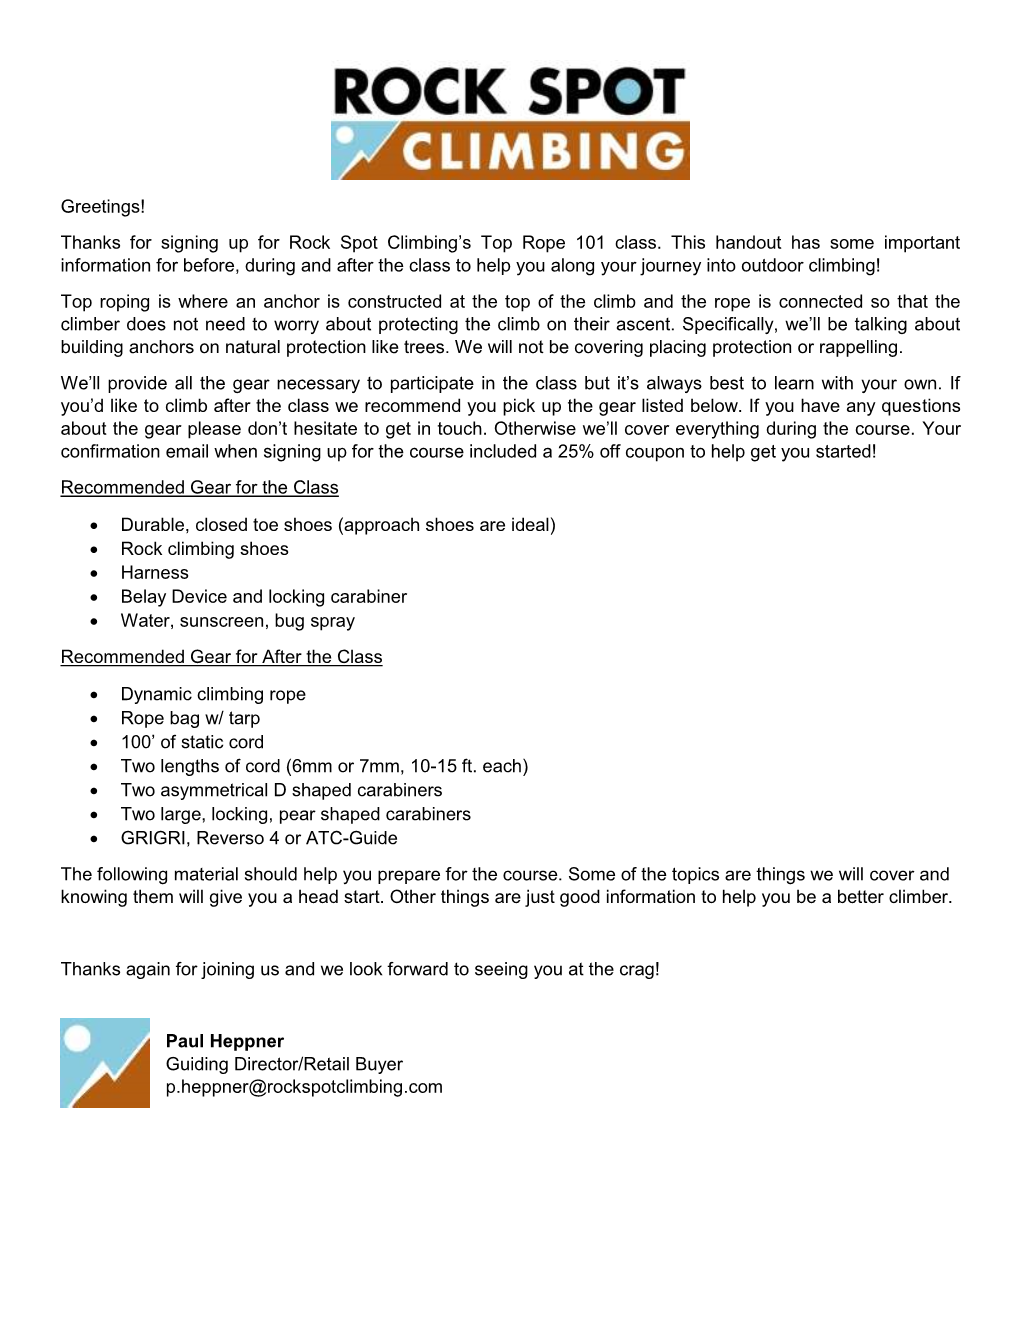 Thanks for Signing up for Rock Spot Climbing's Top Rope 101 Class